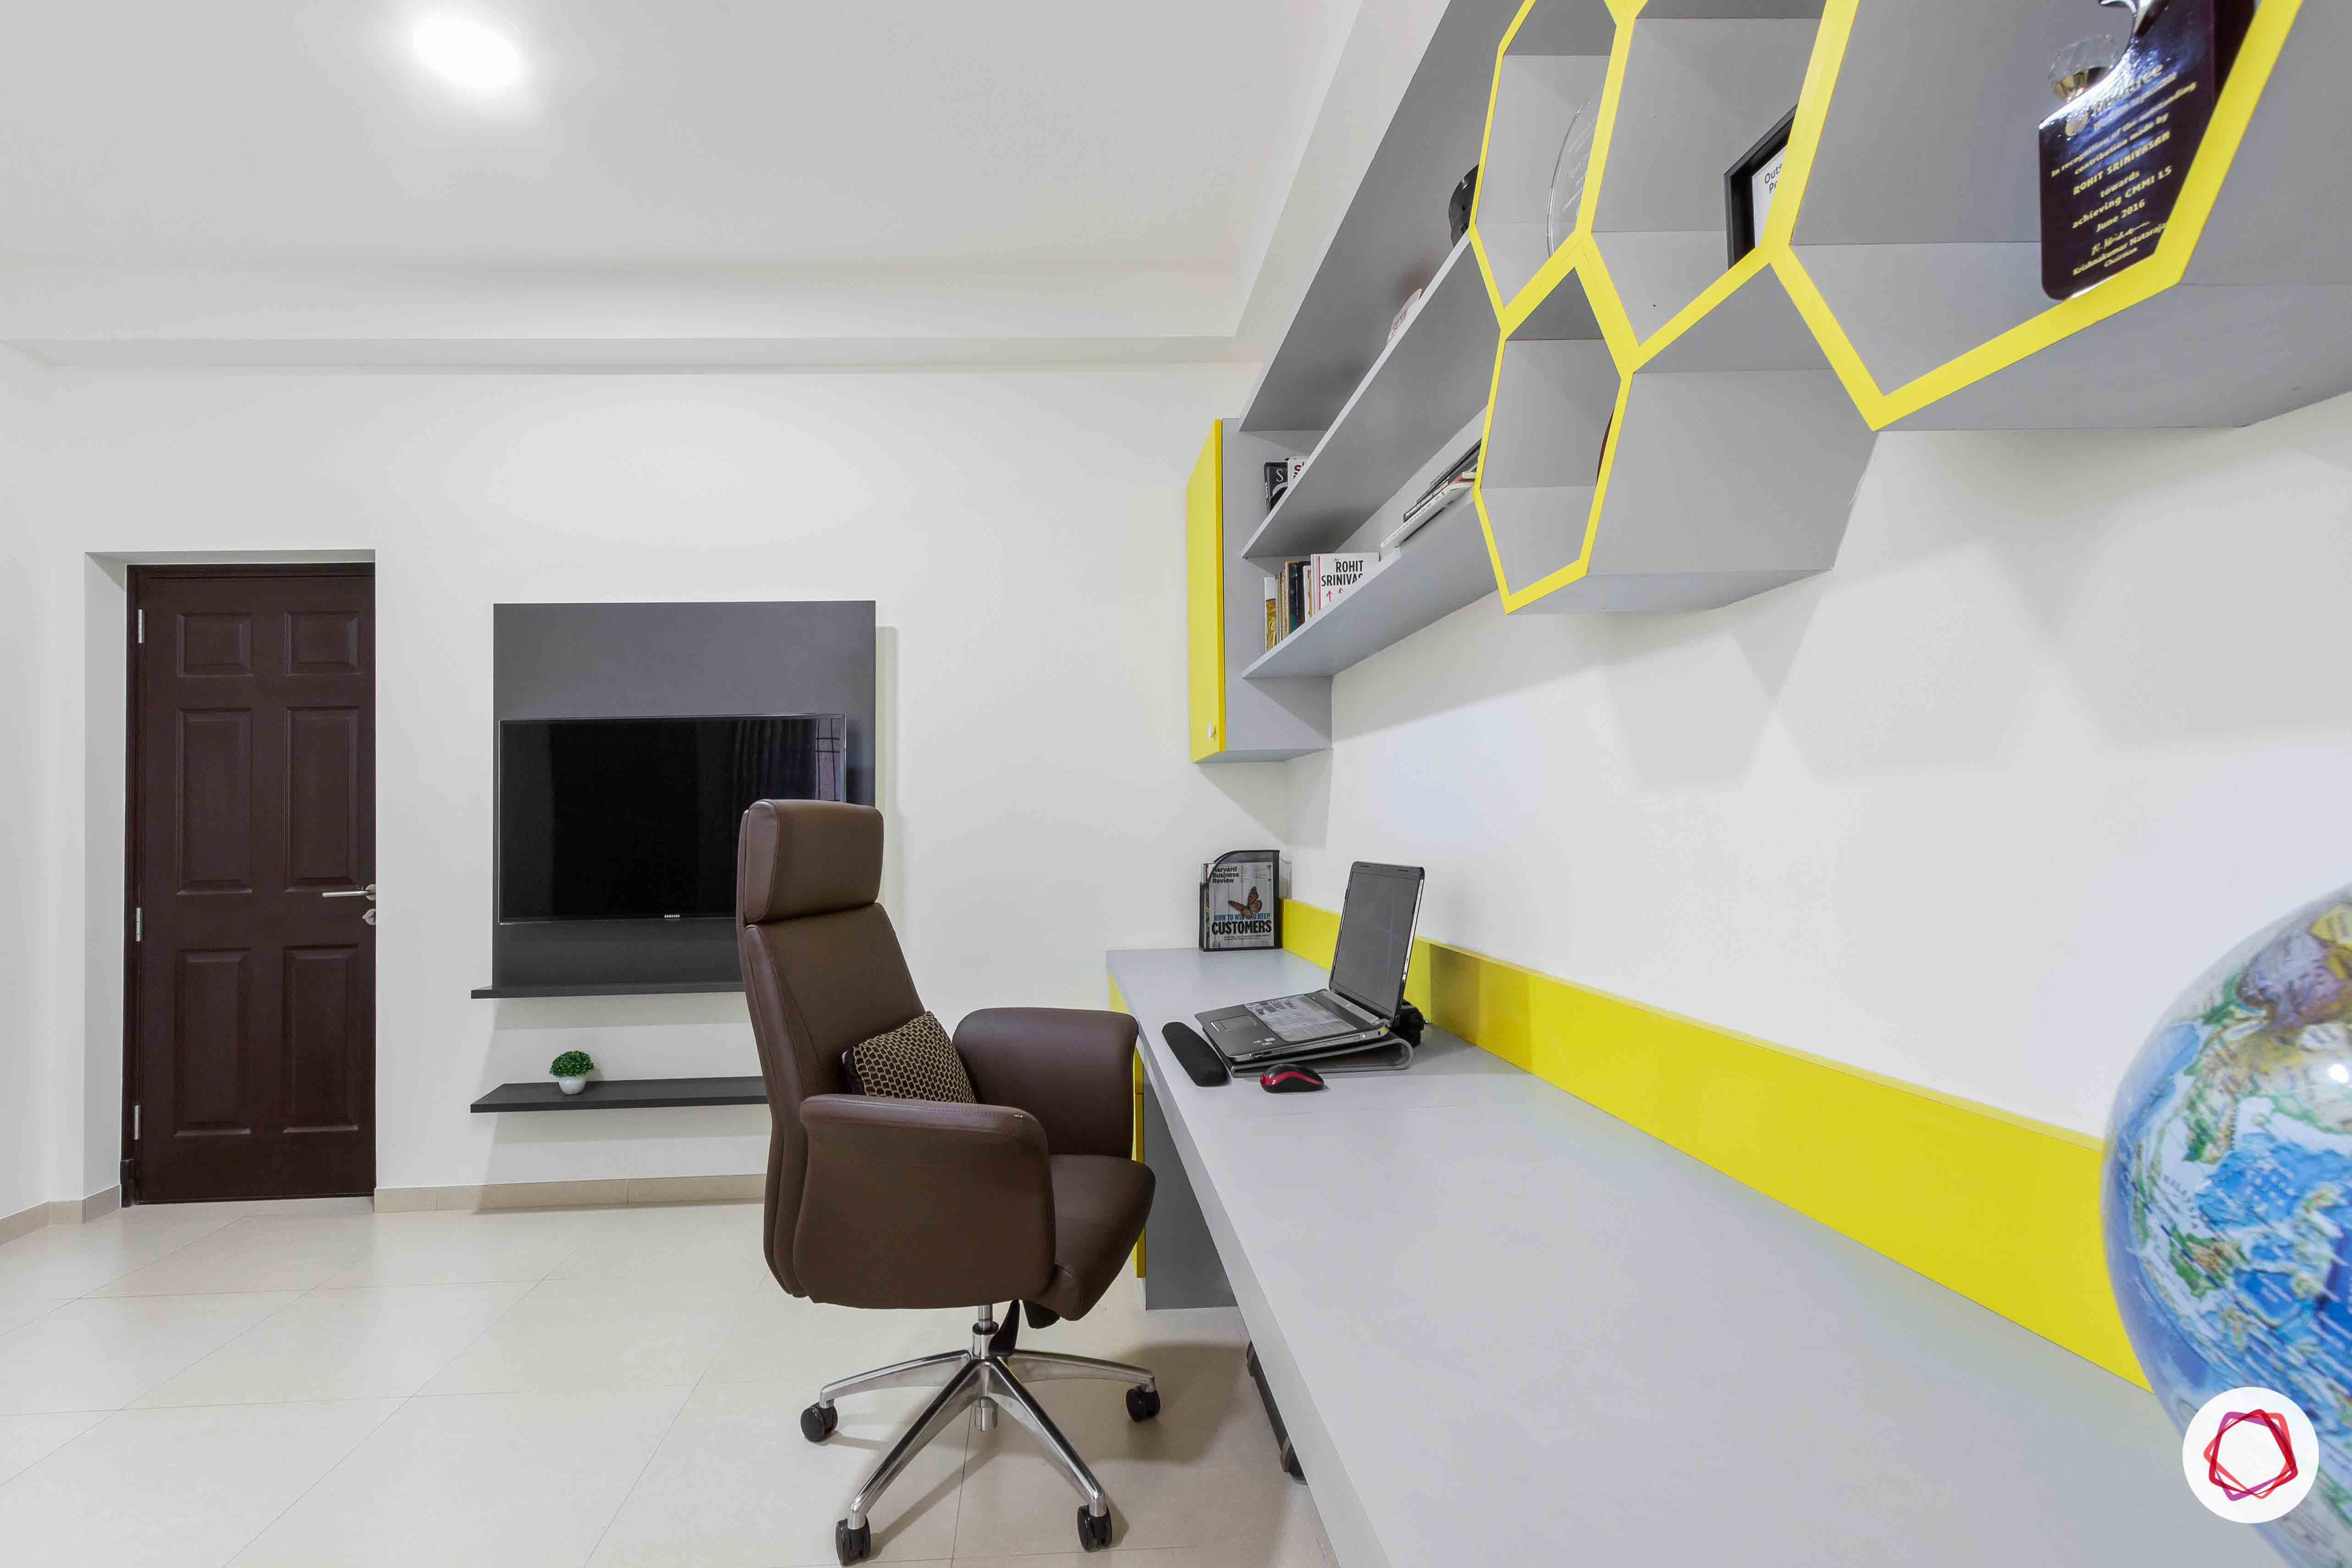 sobha forest view-study room-big study table-office chair